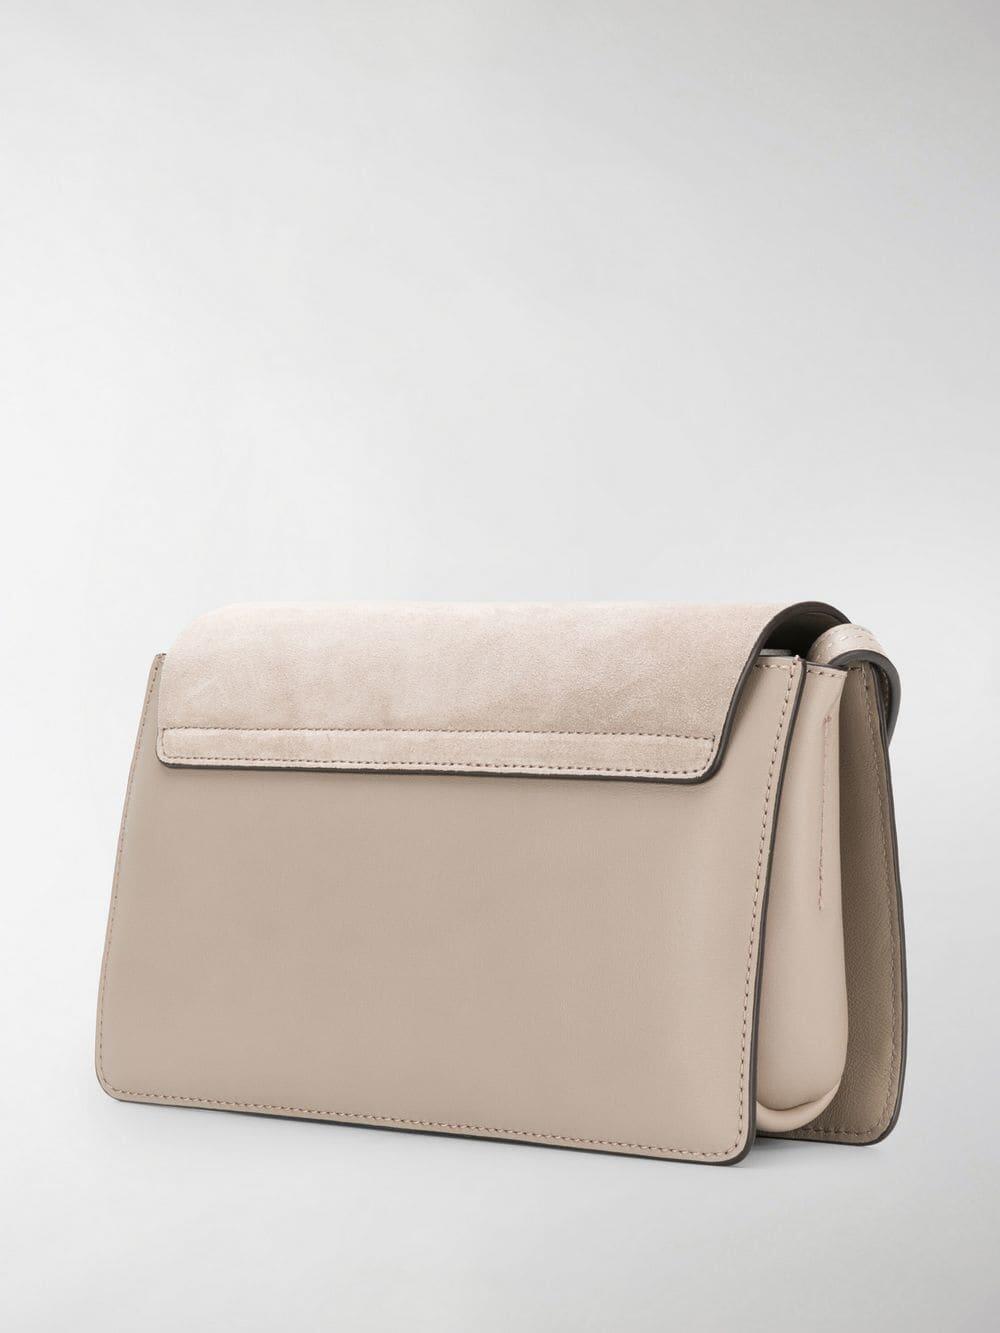 Chloé Faye Small Suede And Leather Shoulder Bag in Green